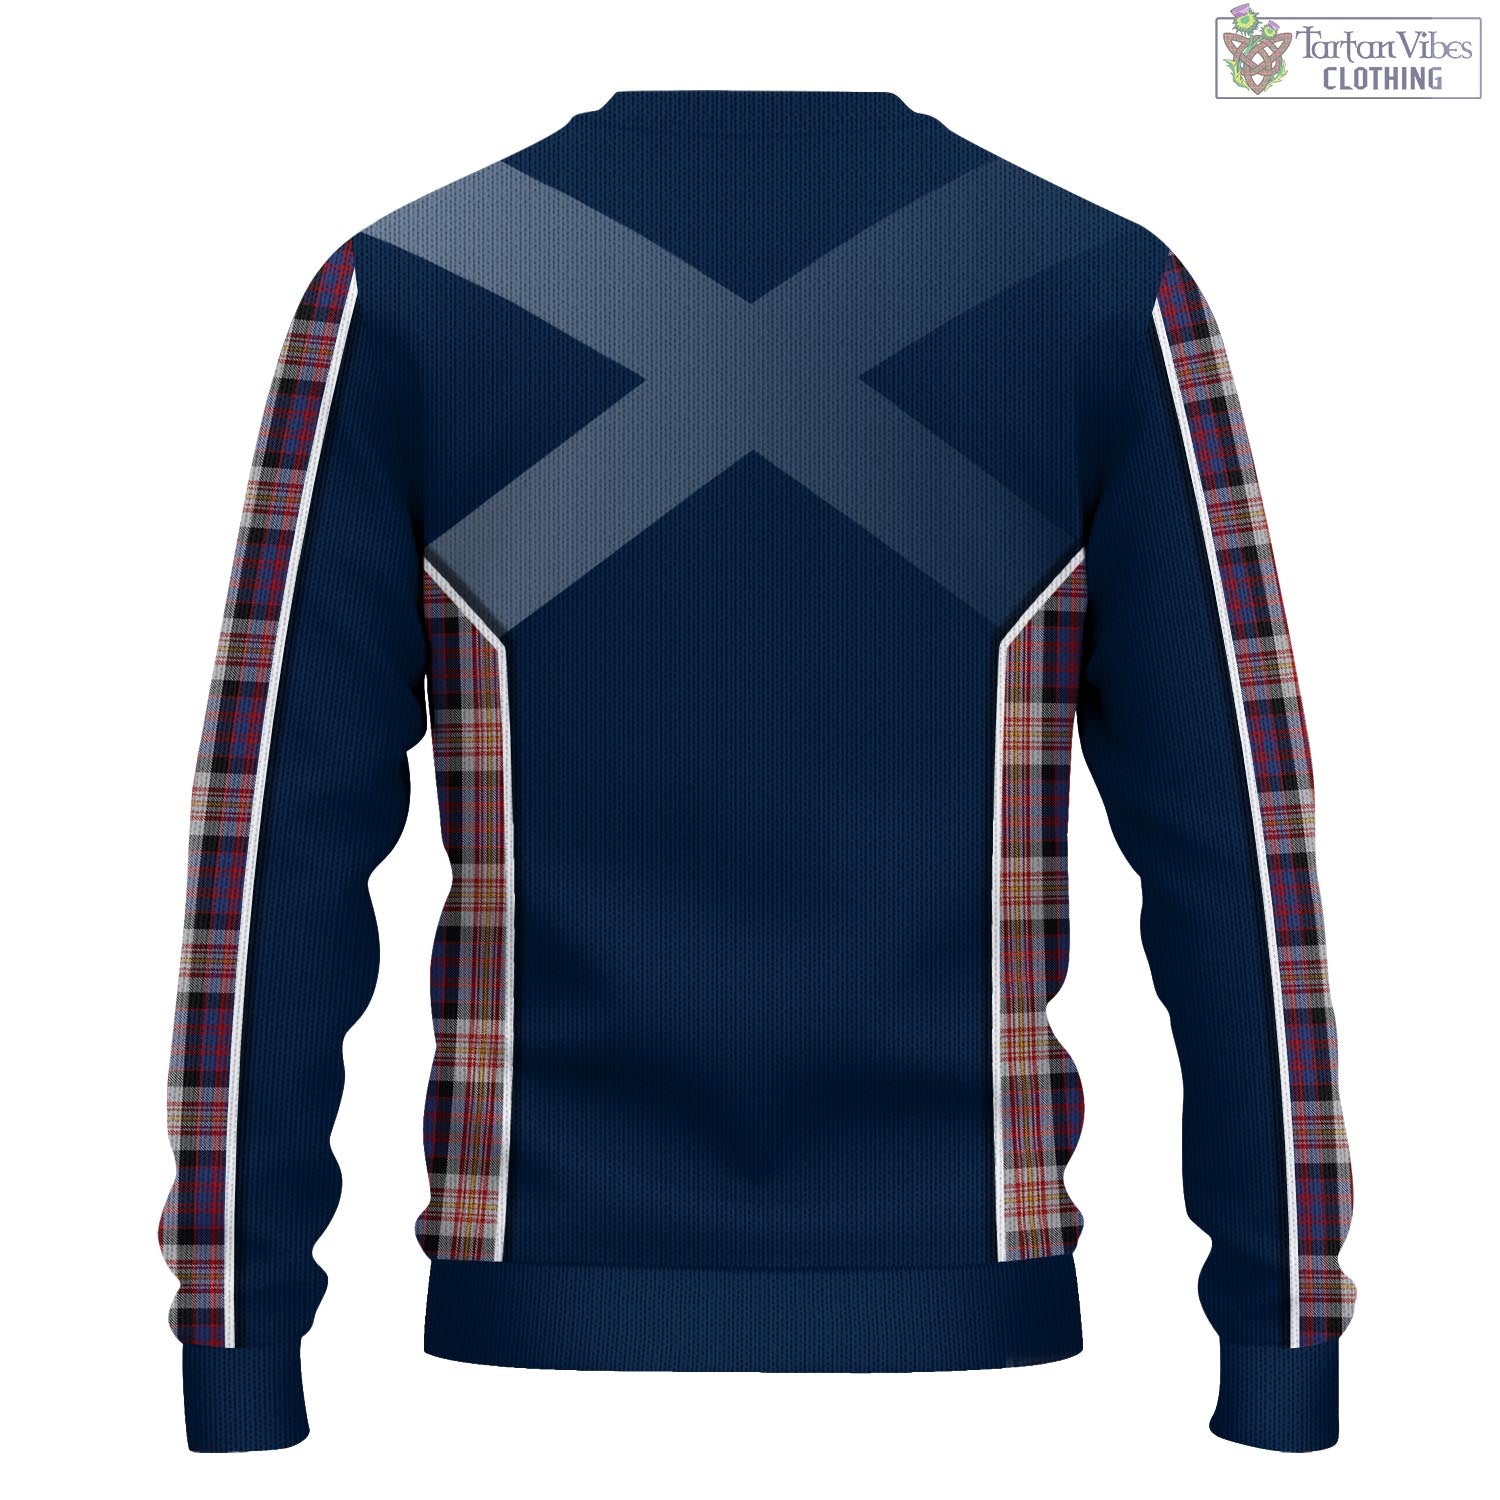 Tartan Vibes Clothing Carnegie Tartan Knitted Sweatshirt with Family Crest and Scottish Thistle Vibes Sport Style